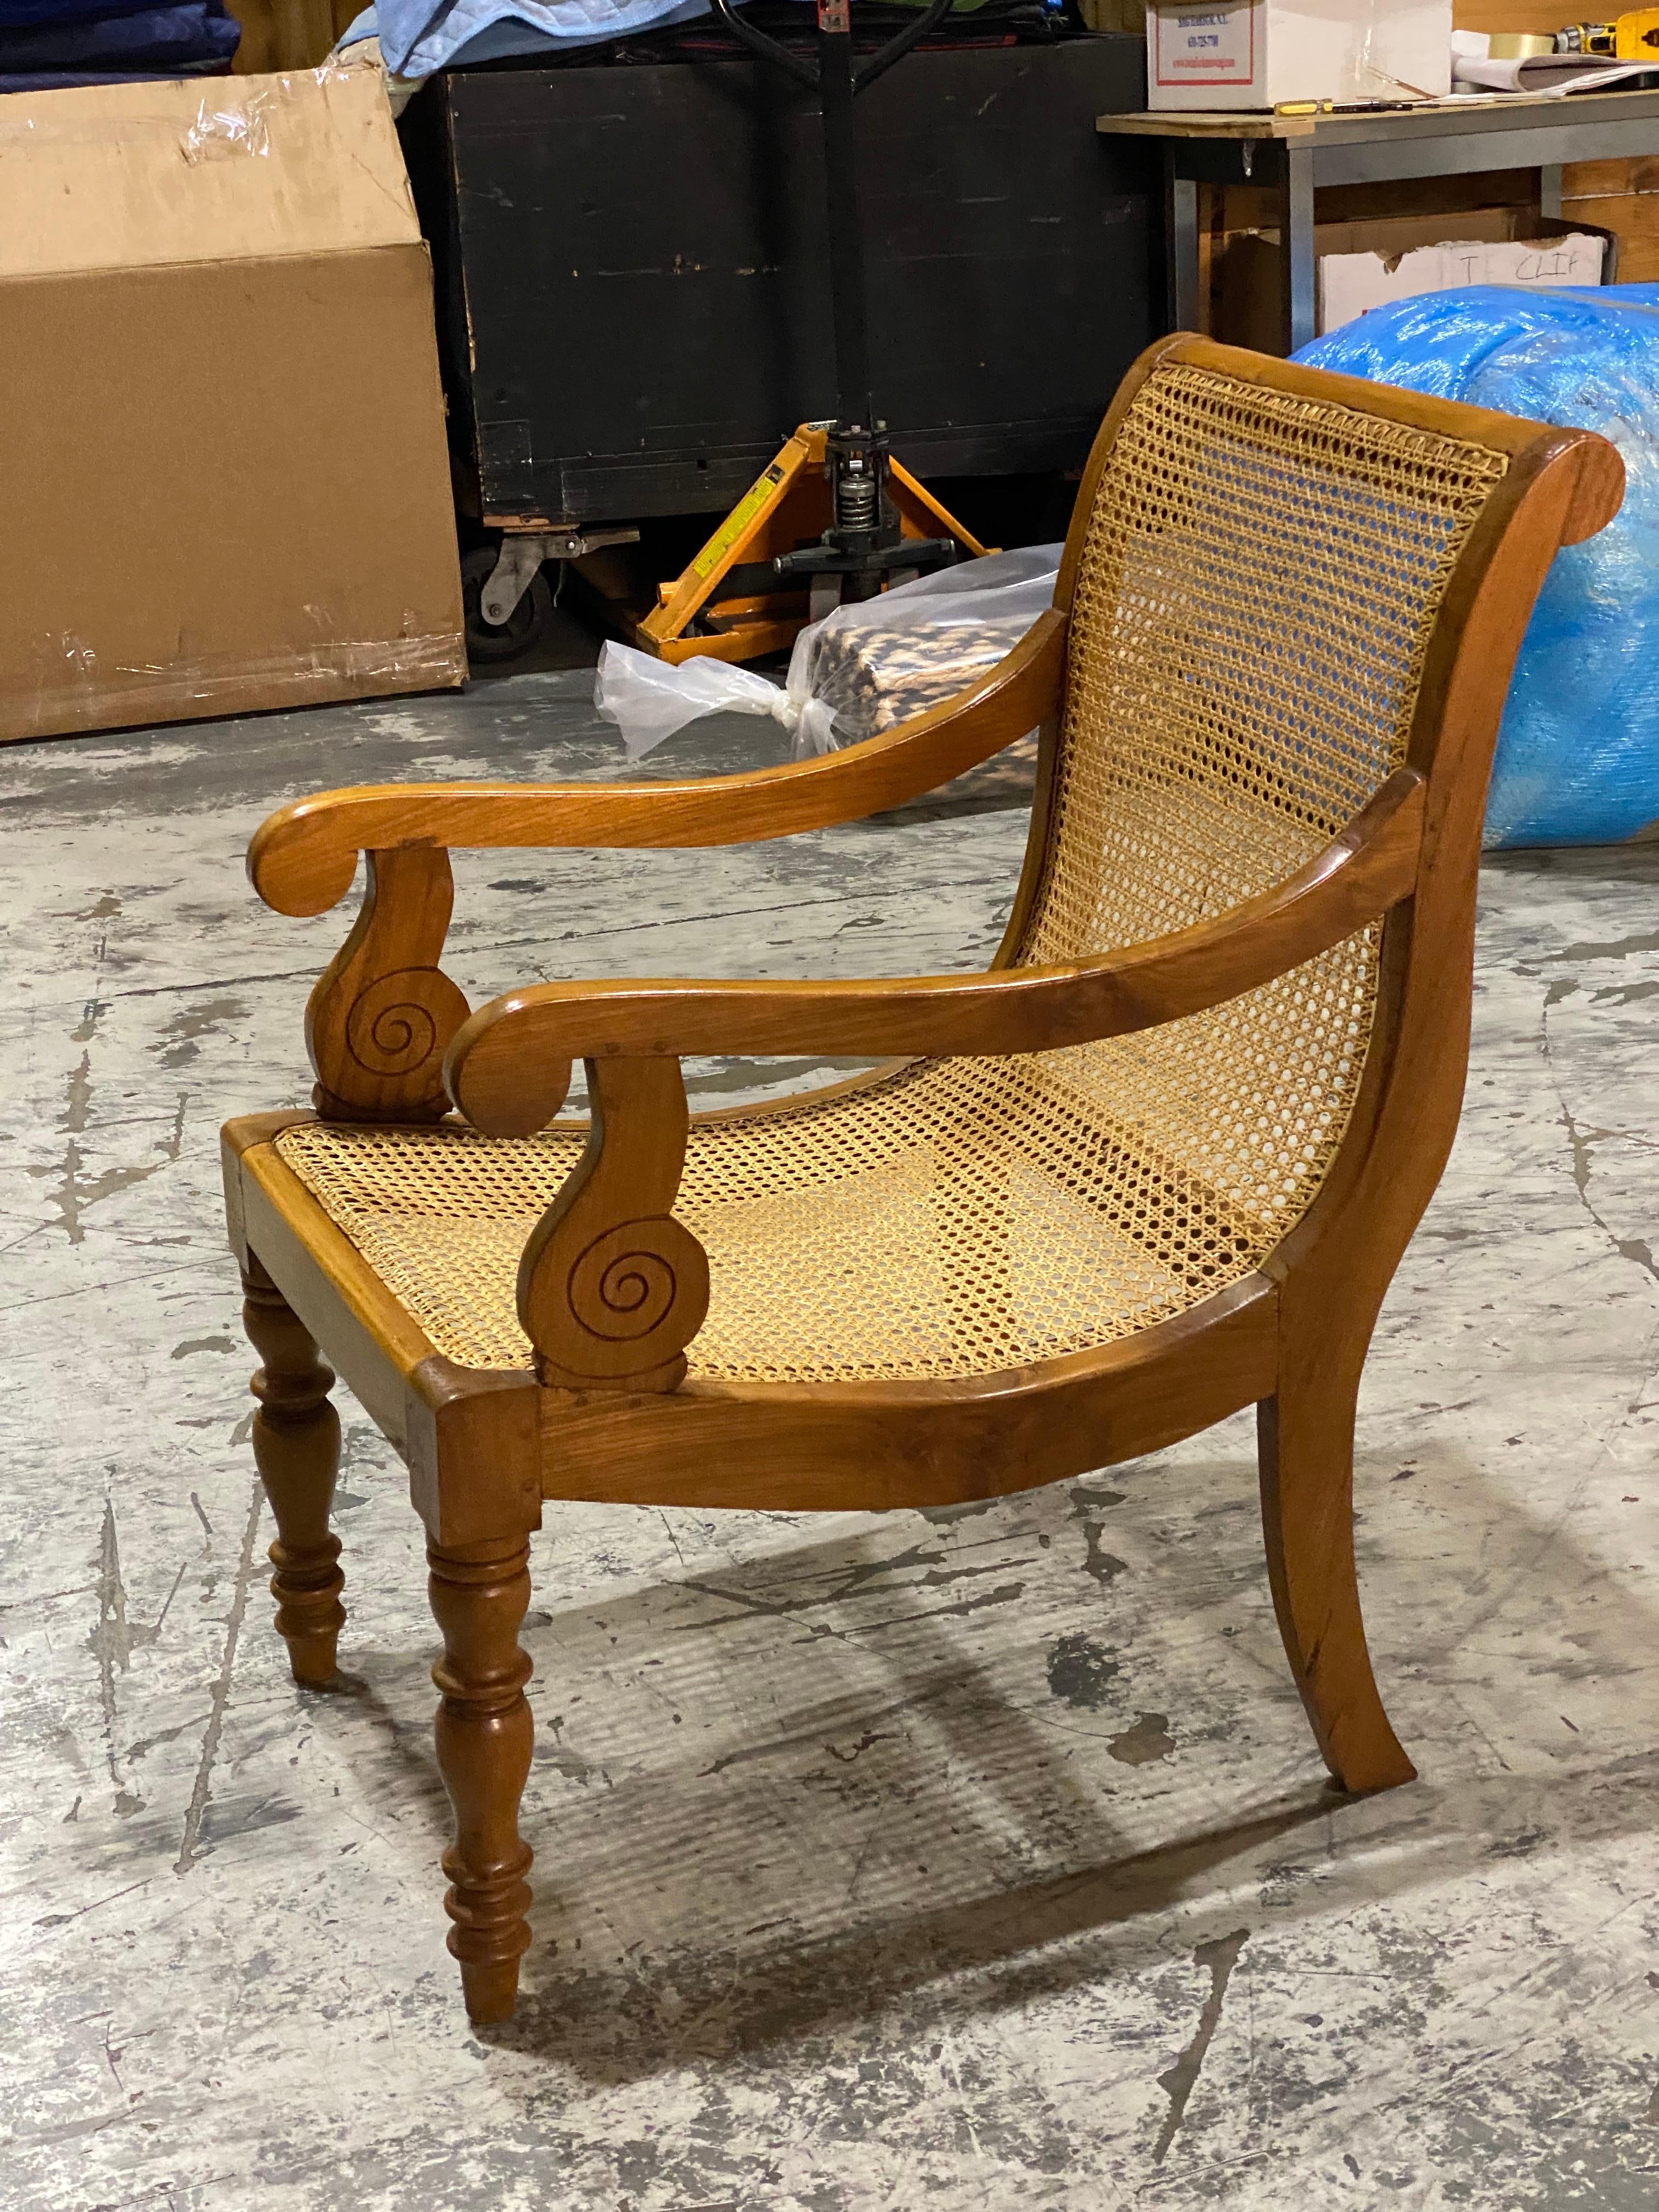 British Colonial Ceylonese Solid Satinwood & Hand Caned Armchair
Made entirely out of satinwood.  Gentle curved back. Hand caning seat - still in good condition. Spiral arms are a unique detail on this chair.  Front legs are turned, back splay out.